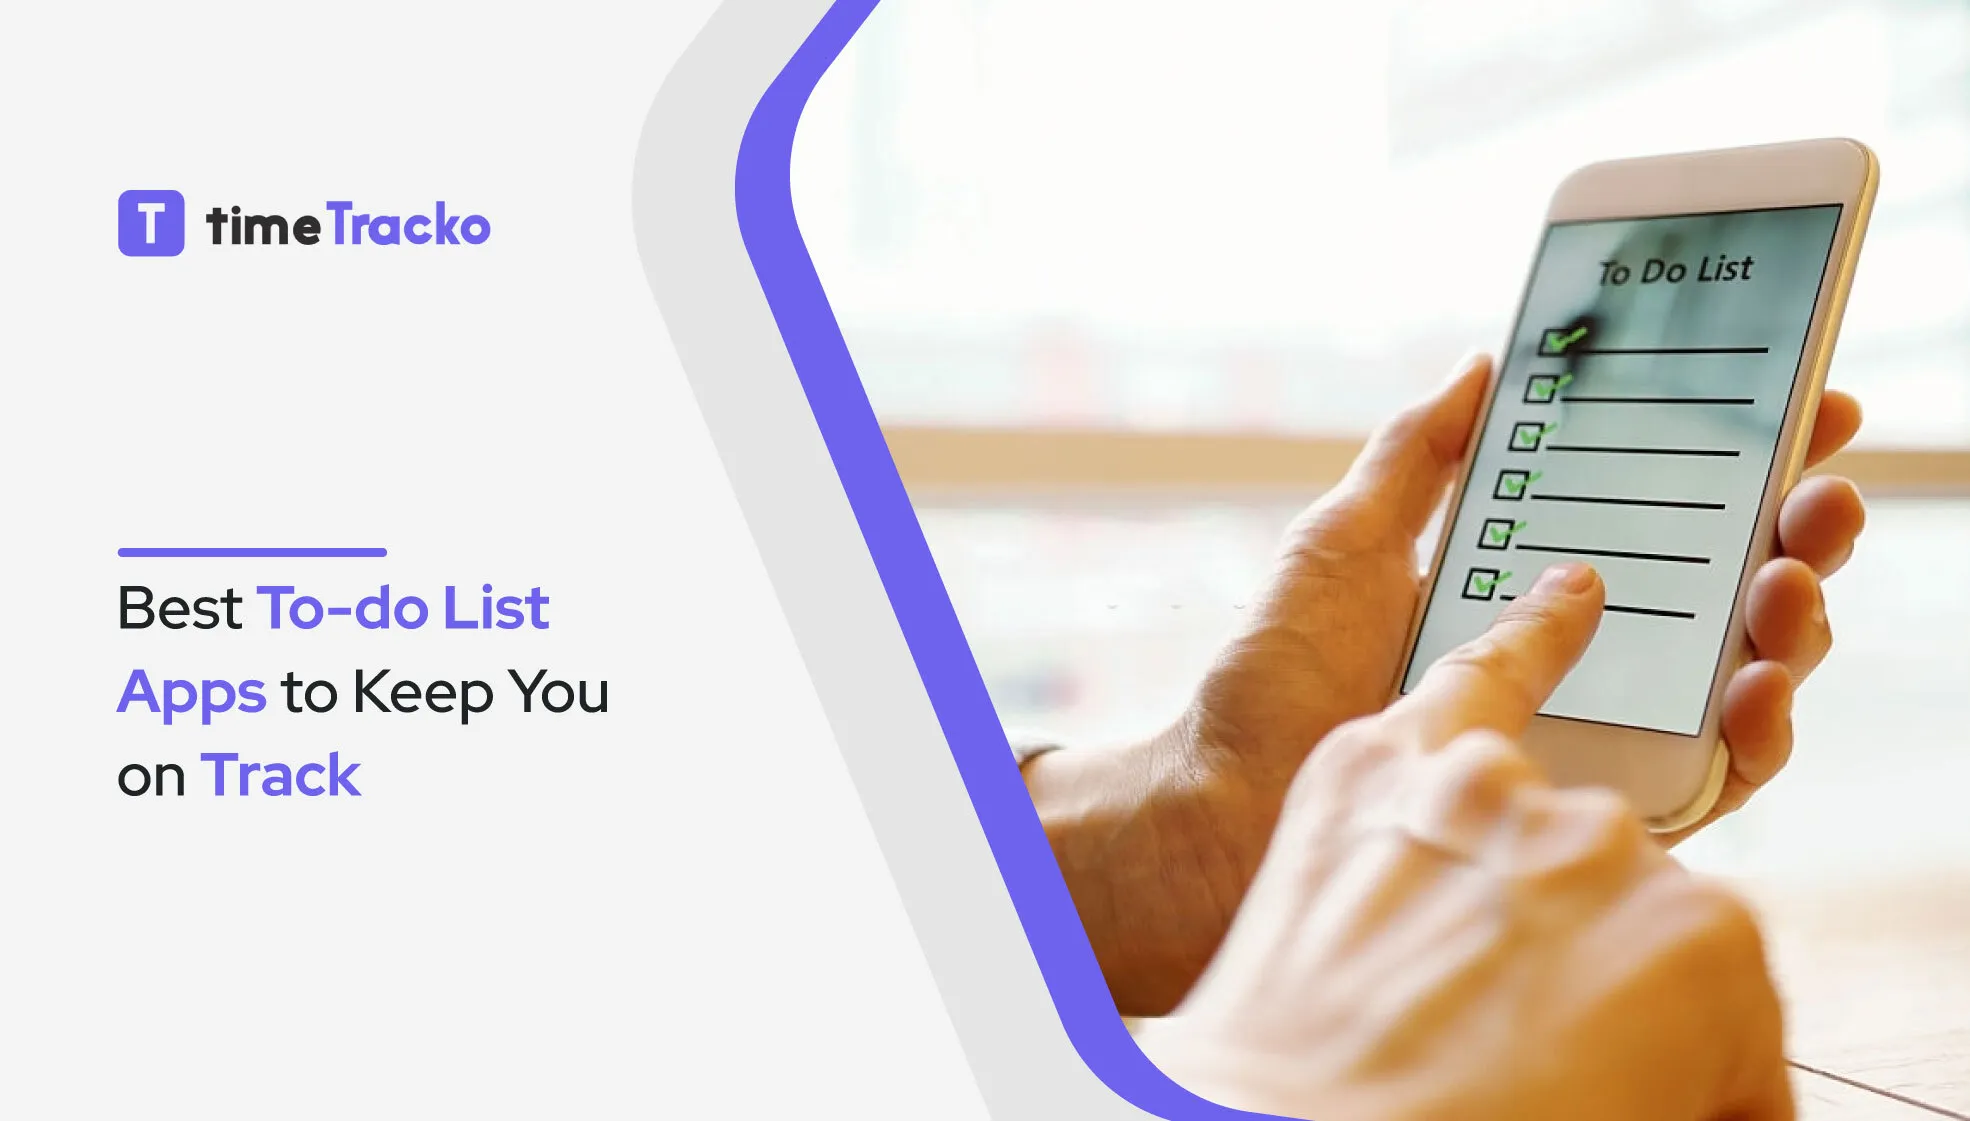 Best To-do List Apps to Keep You on Track